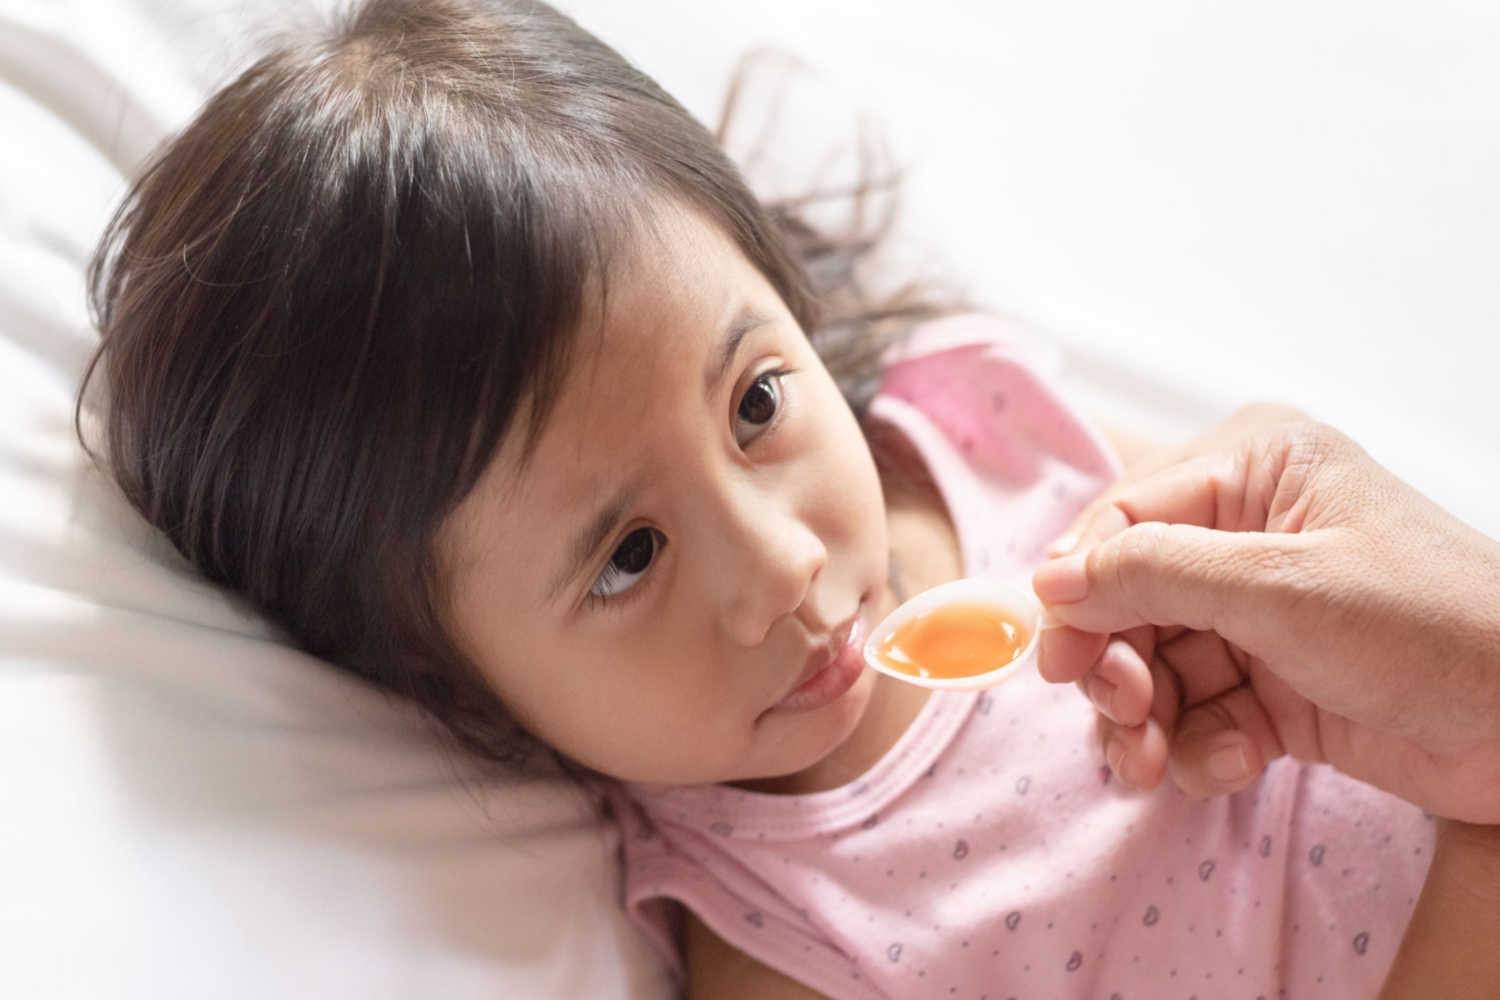 How Can Parents Help Their Child Recover From a Bad Viral Fever